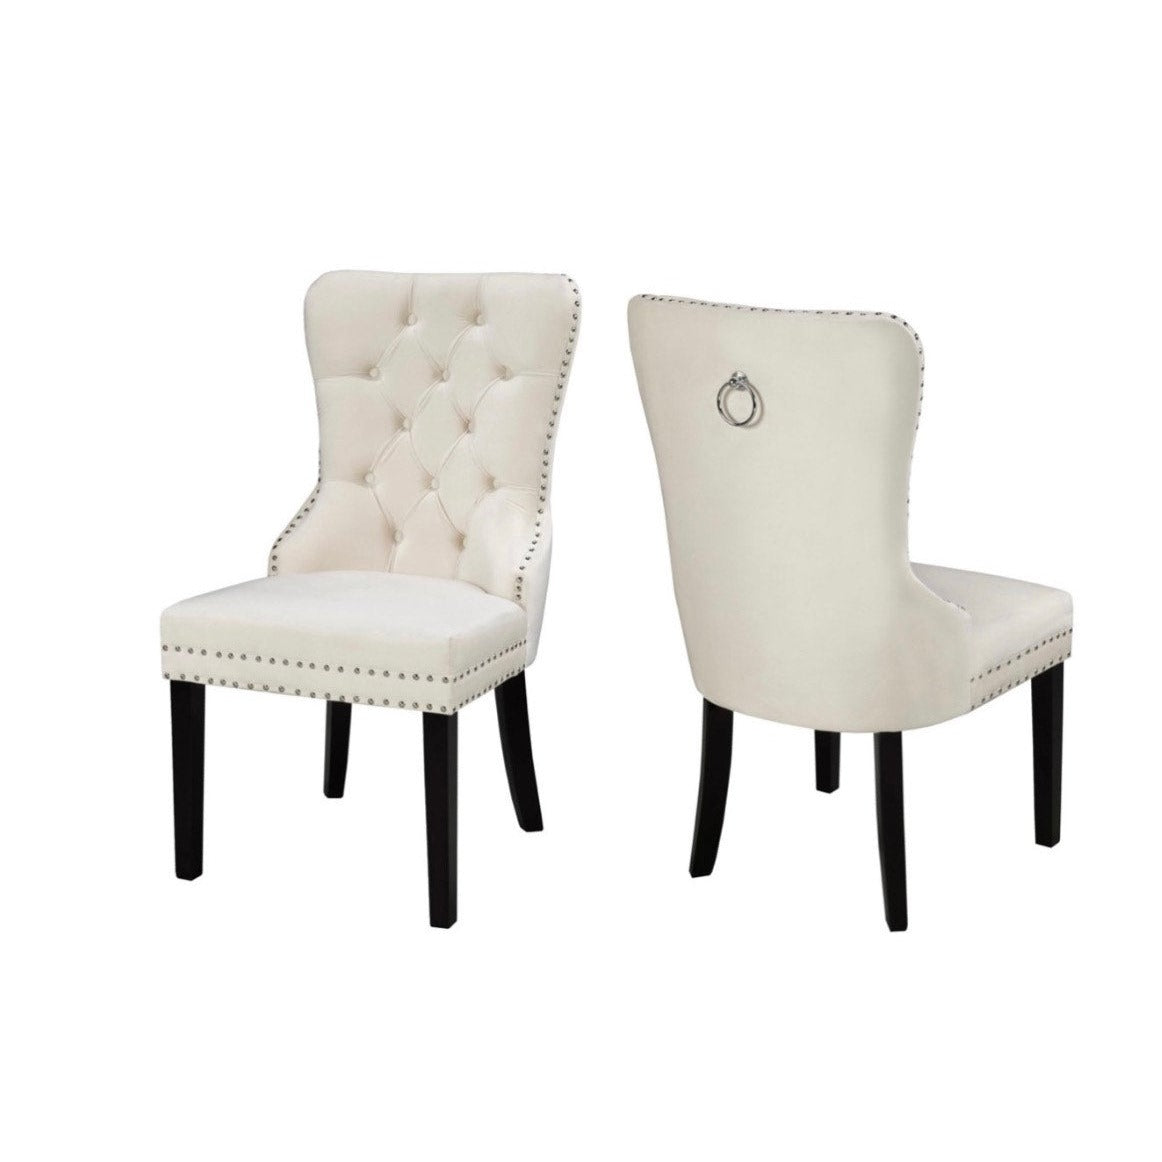 BELLIA 2 IVORY CHAIRS